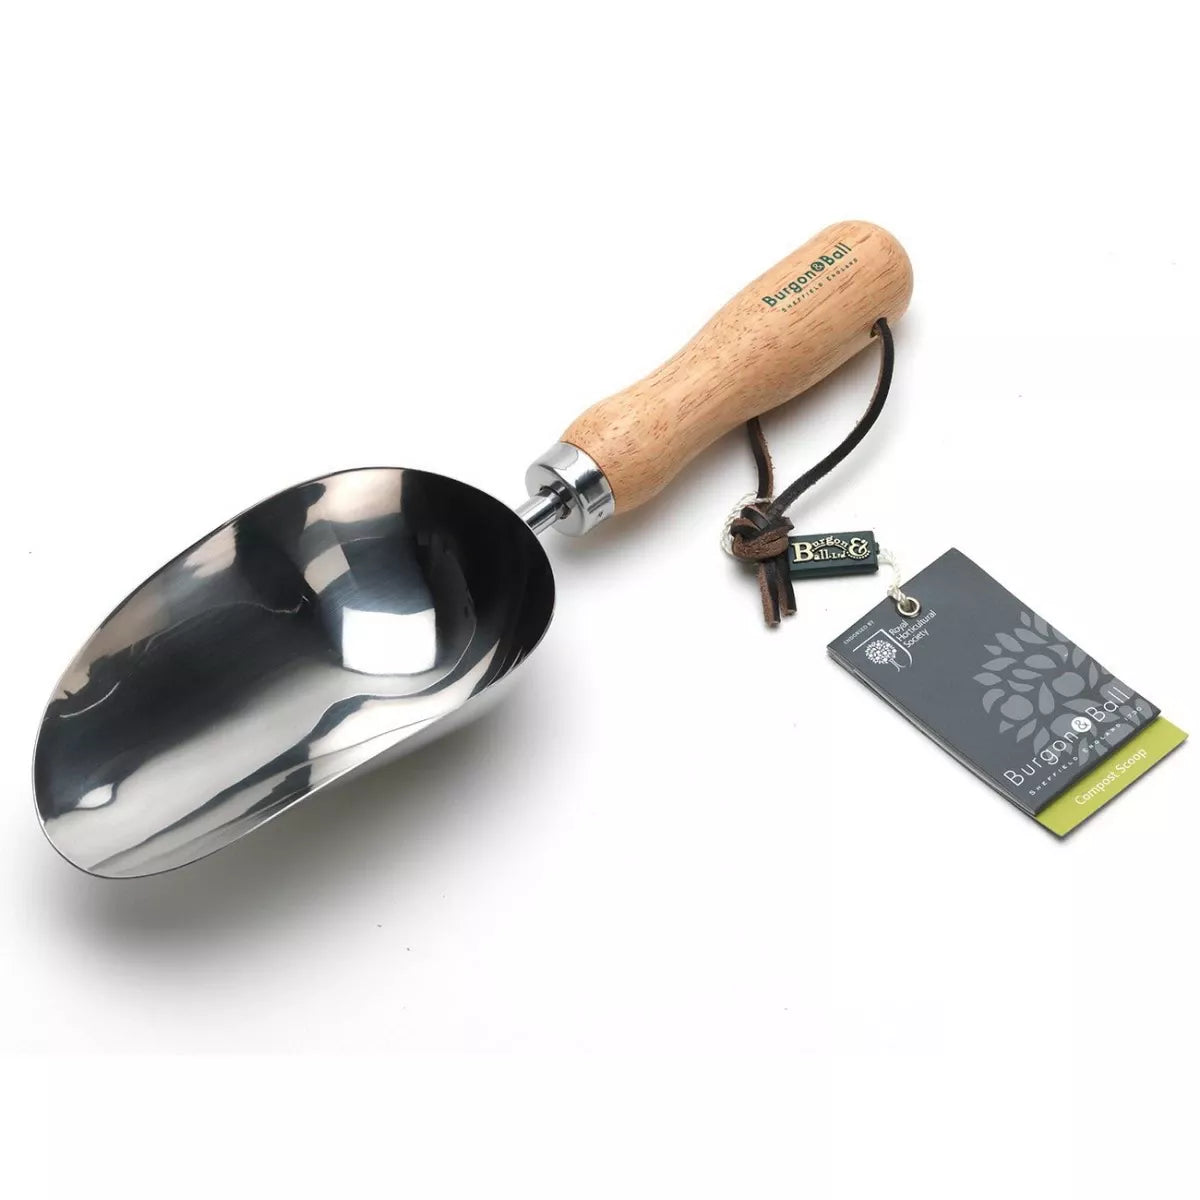  Burgon & Ball Stainless Steel Compost Scoop - RHS Endorsed GTH/SCSRHS The Green Thumb Club